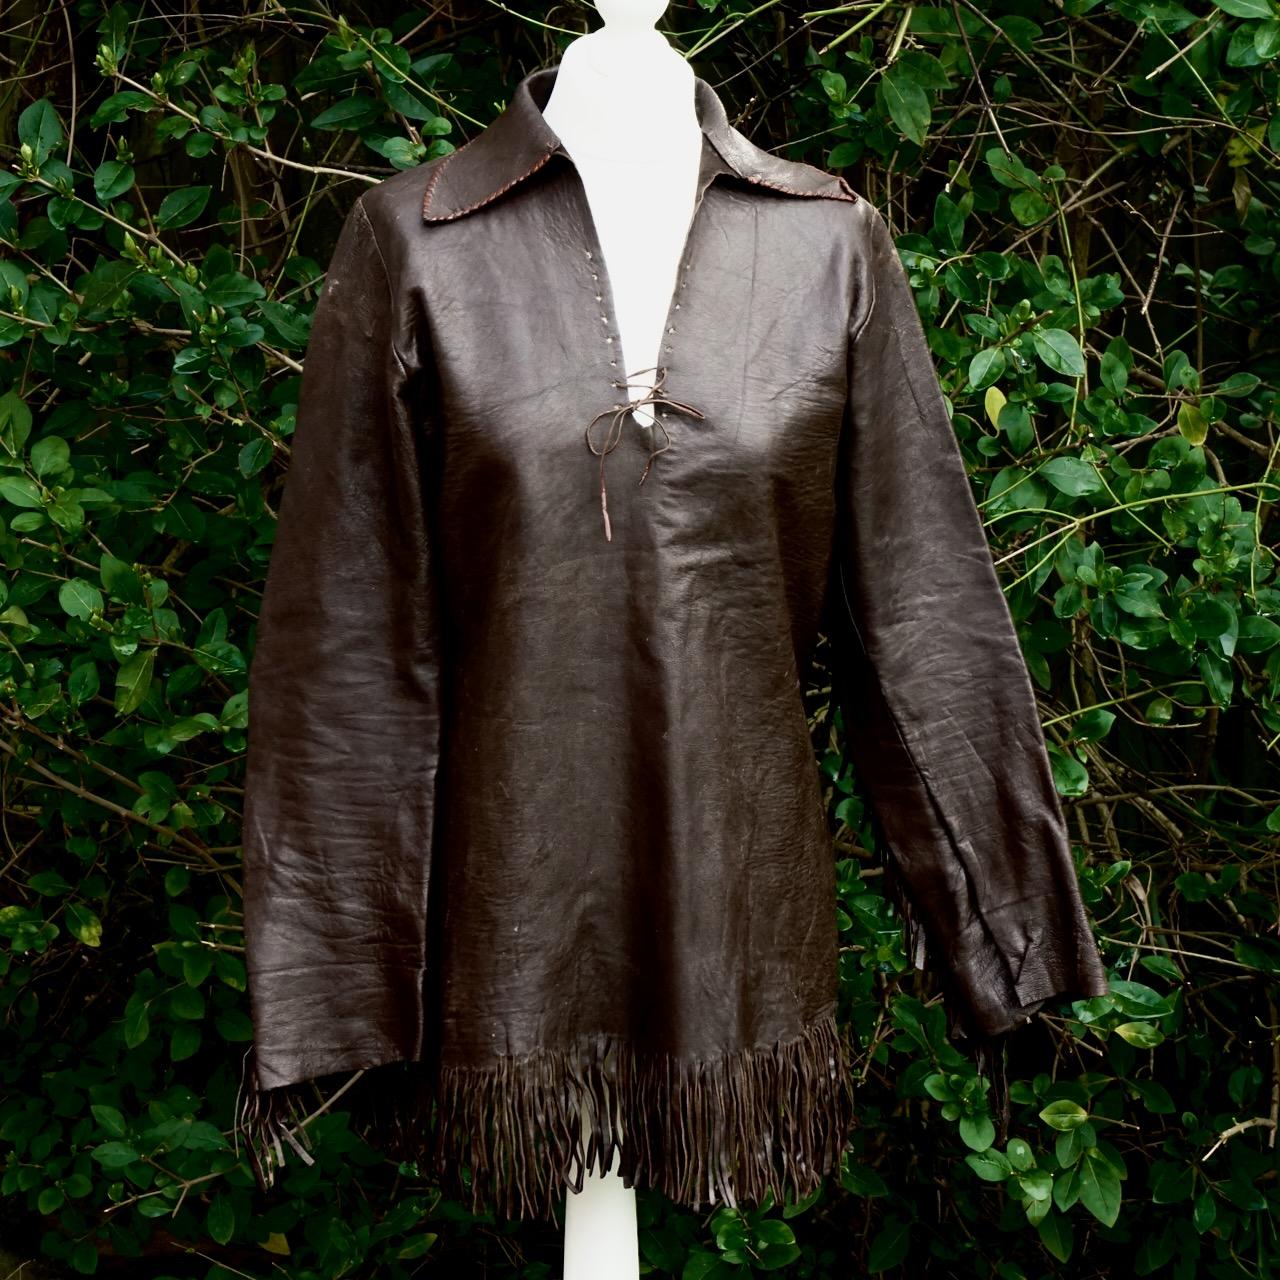 Amazing soft brown leather top, with fringing along the sleeves and bottom. It has leather lacing to the front, and the collar is finished around the edge with contrasting hand stitching. The top was purchased at Lord John of Carnaby Street, London,